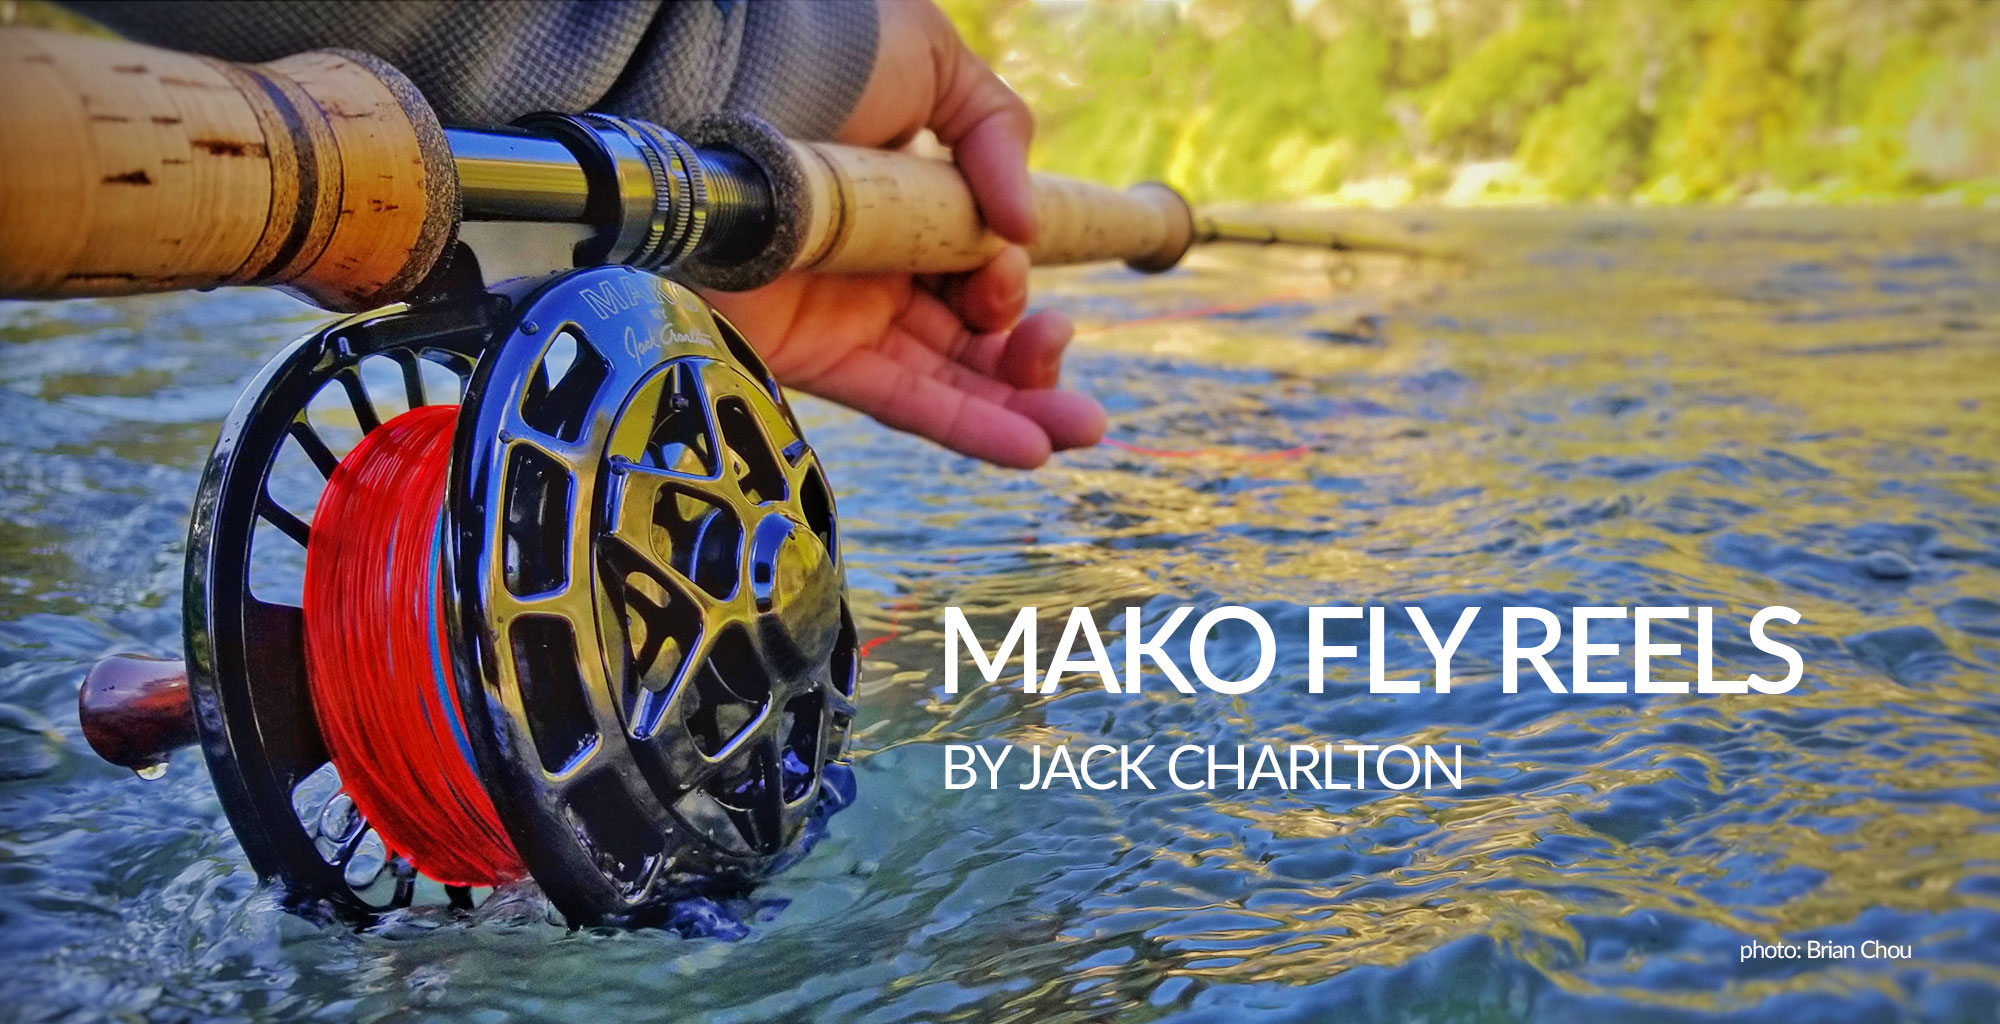 All your fly reels should be bomb proof